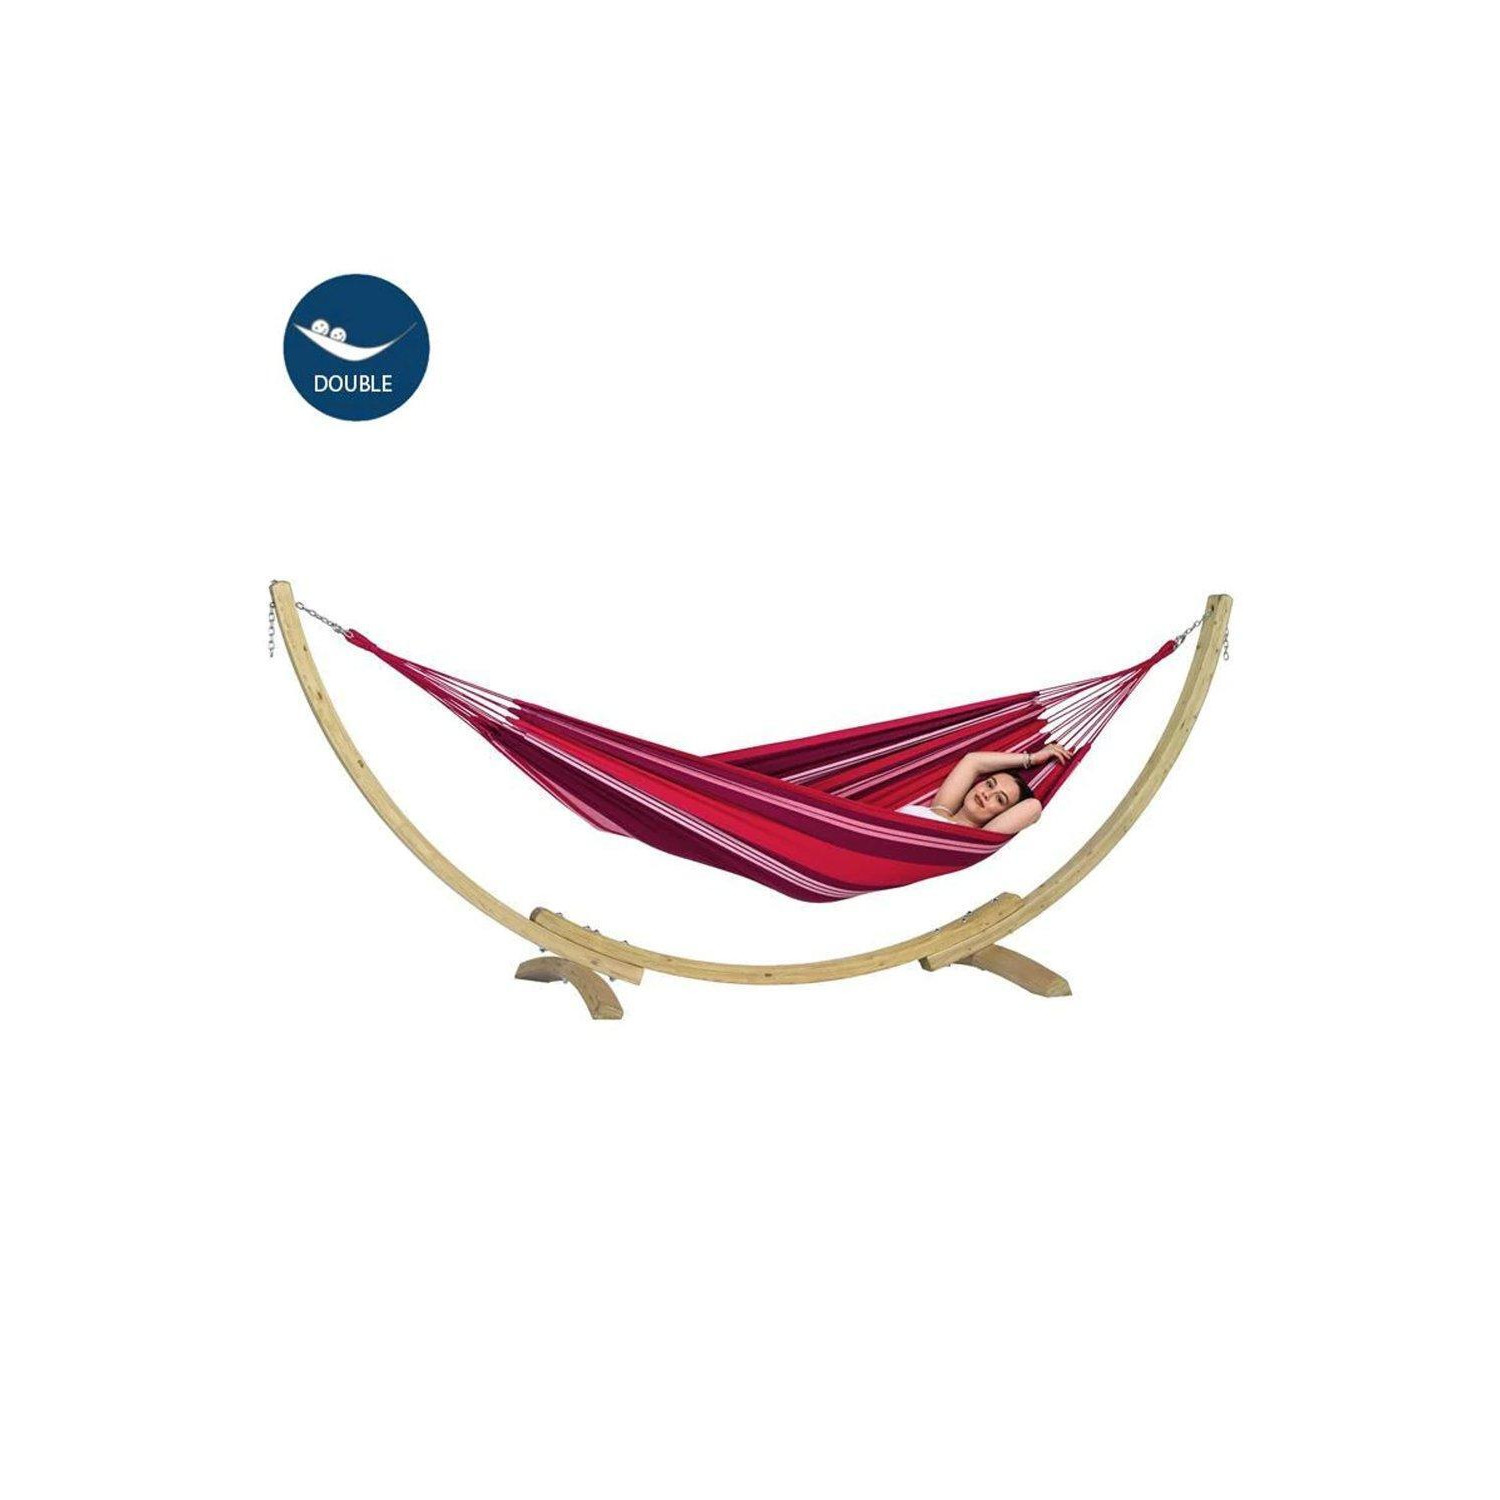 Apollo Set Double hammock and Stand - Fuego - image 1